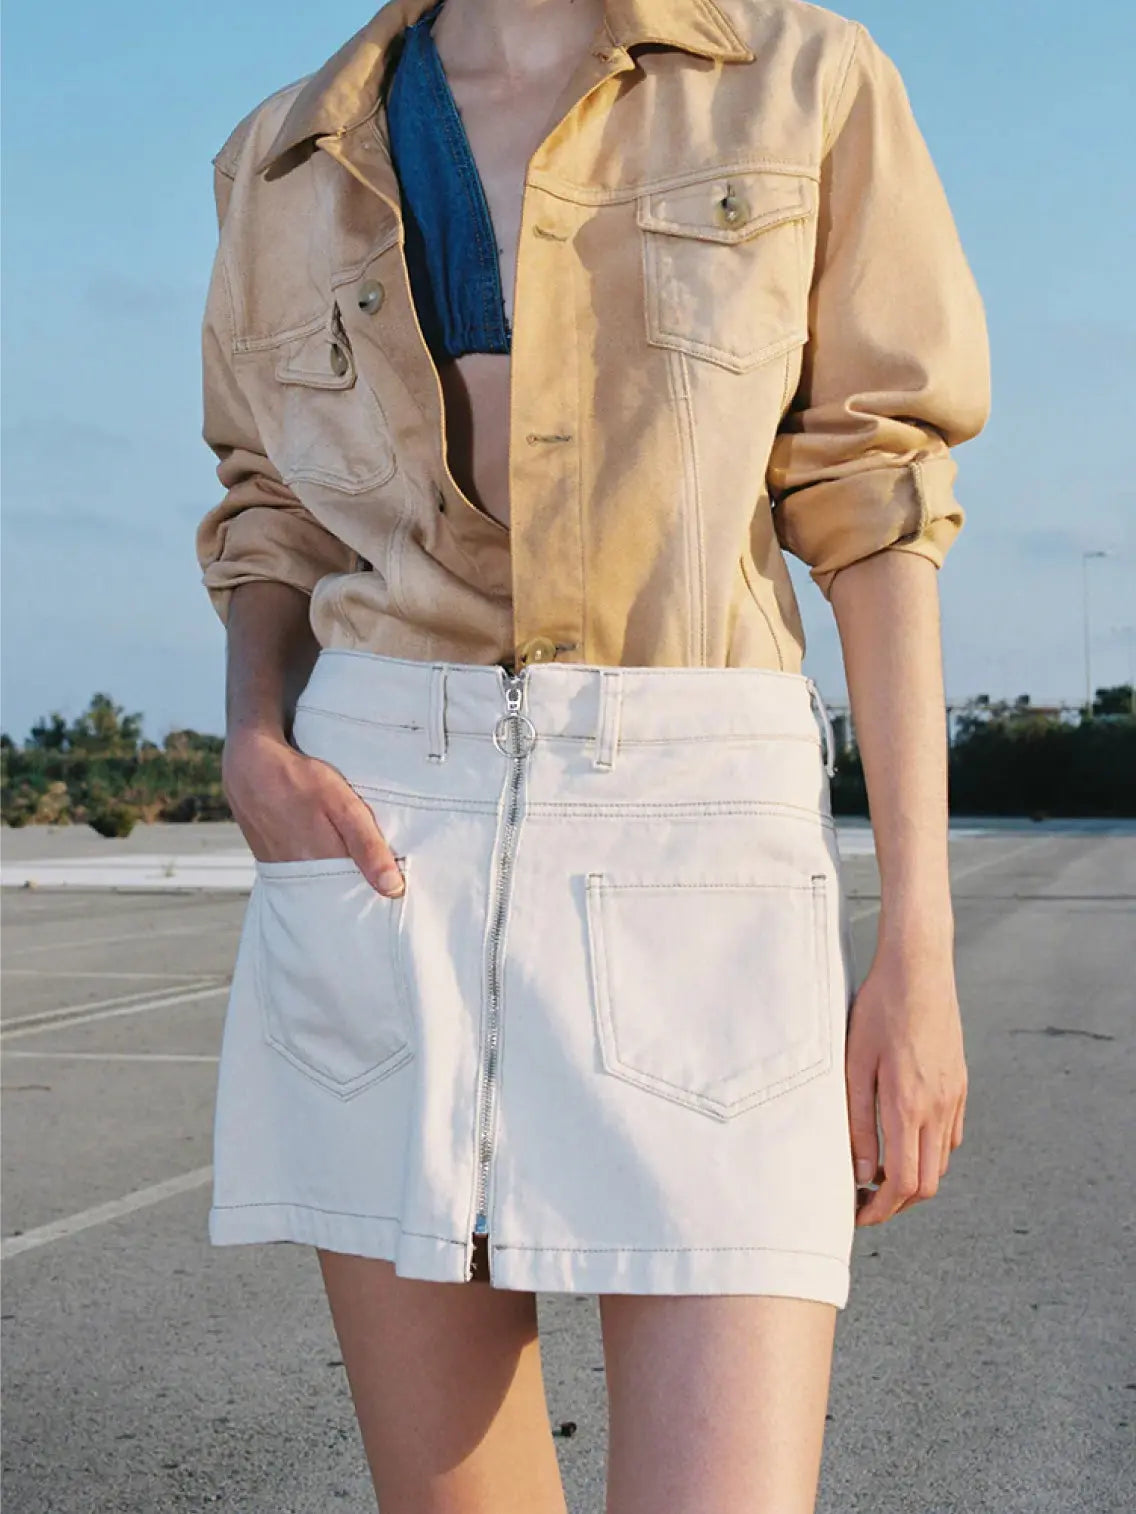 A person is standing outdoors wearing a beige buttoned-down jacket over a blue top and a Denim Mini Skirt White with front pockets and a zipper detail from Mundaka, likely bought in Bassalstore in Barcelona. The background appears to be a paved area with some greenery in the distance under a clear sky.